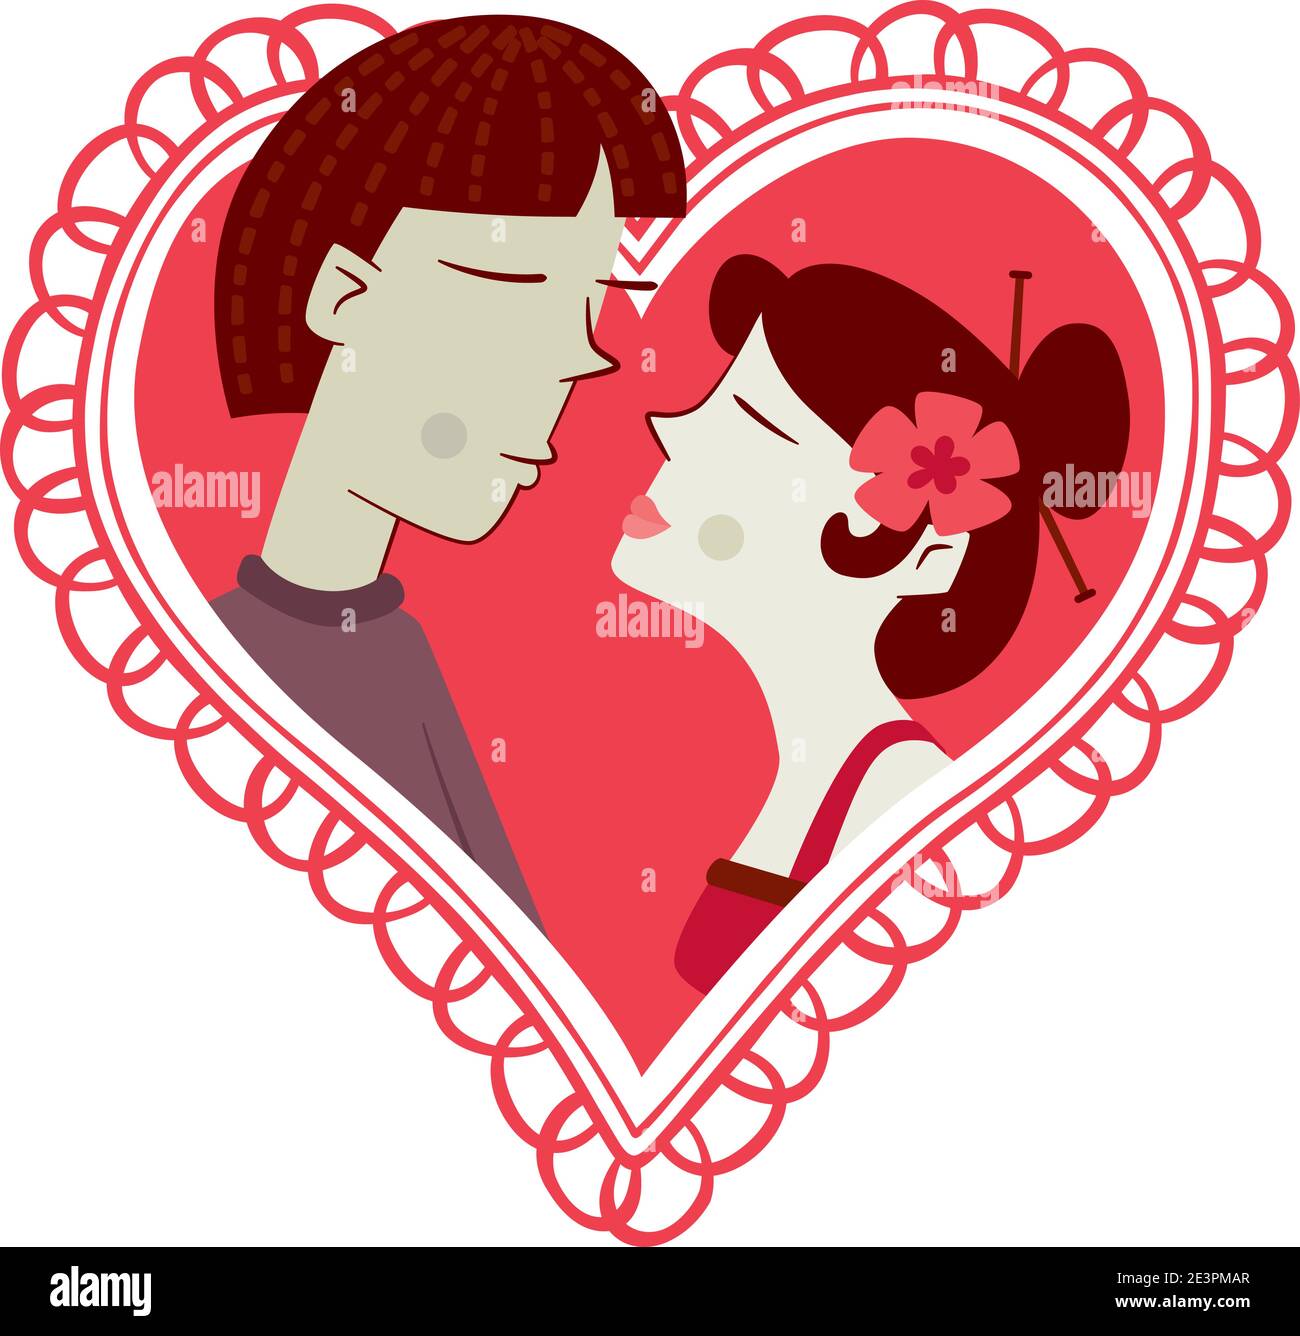 A couple of Asian race kiss on a heart-shaped background. Stock Vector